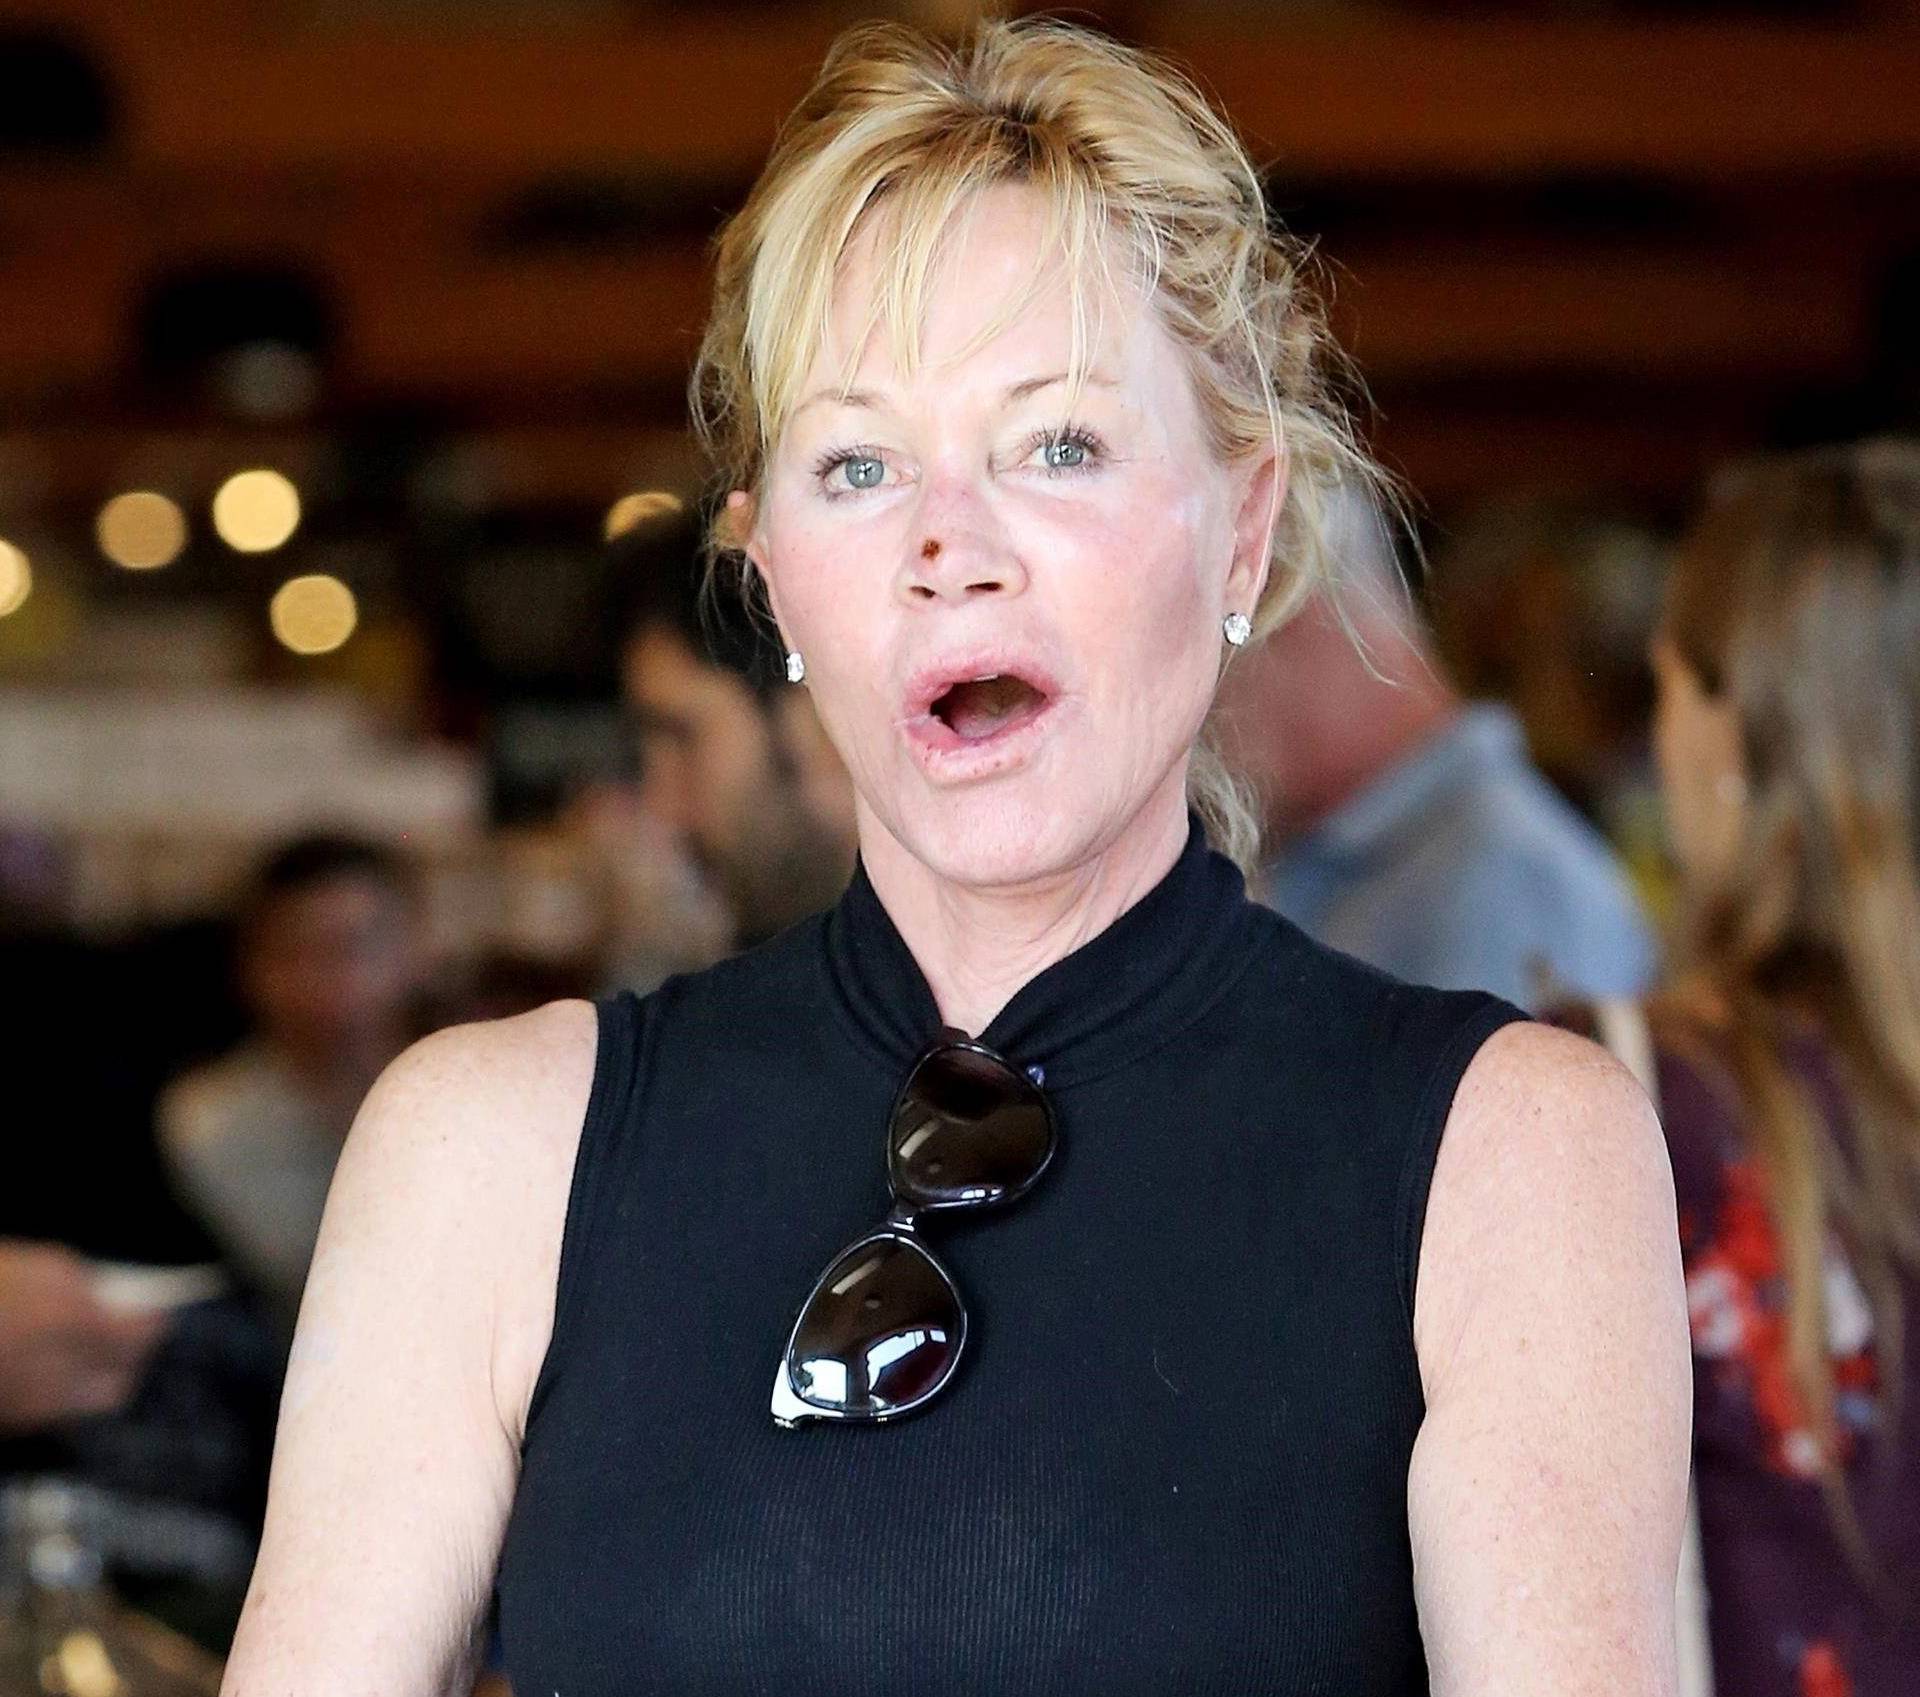 *EXCLUSIVE* Makeup free Melanie Griffith steps out with a scab on her face